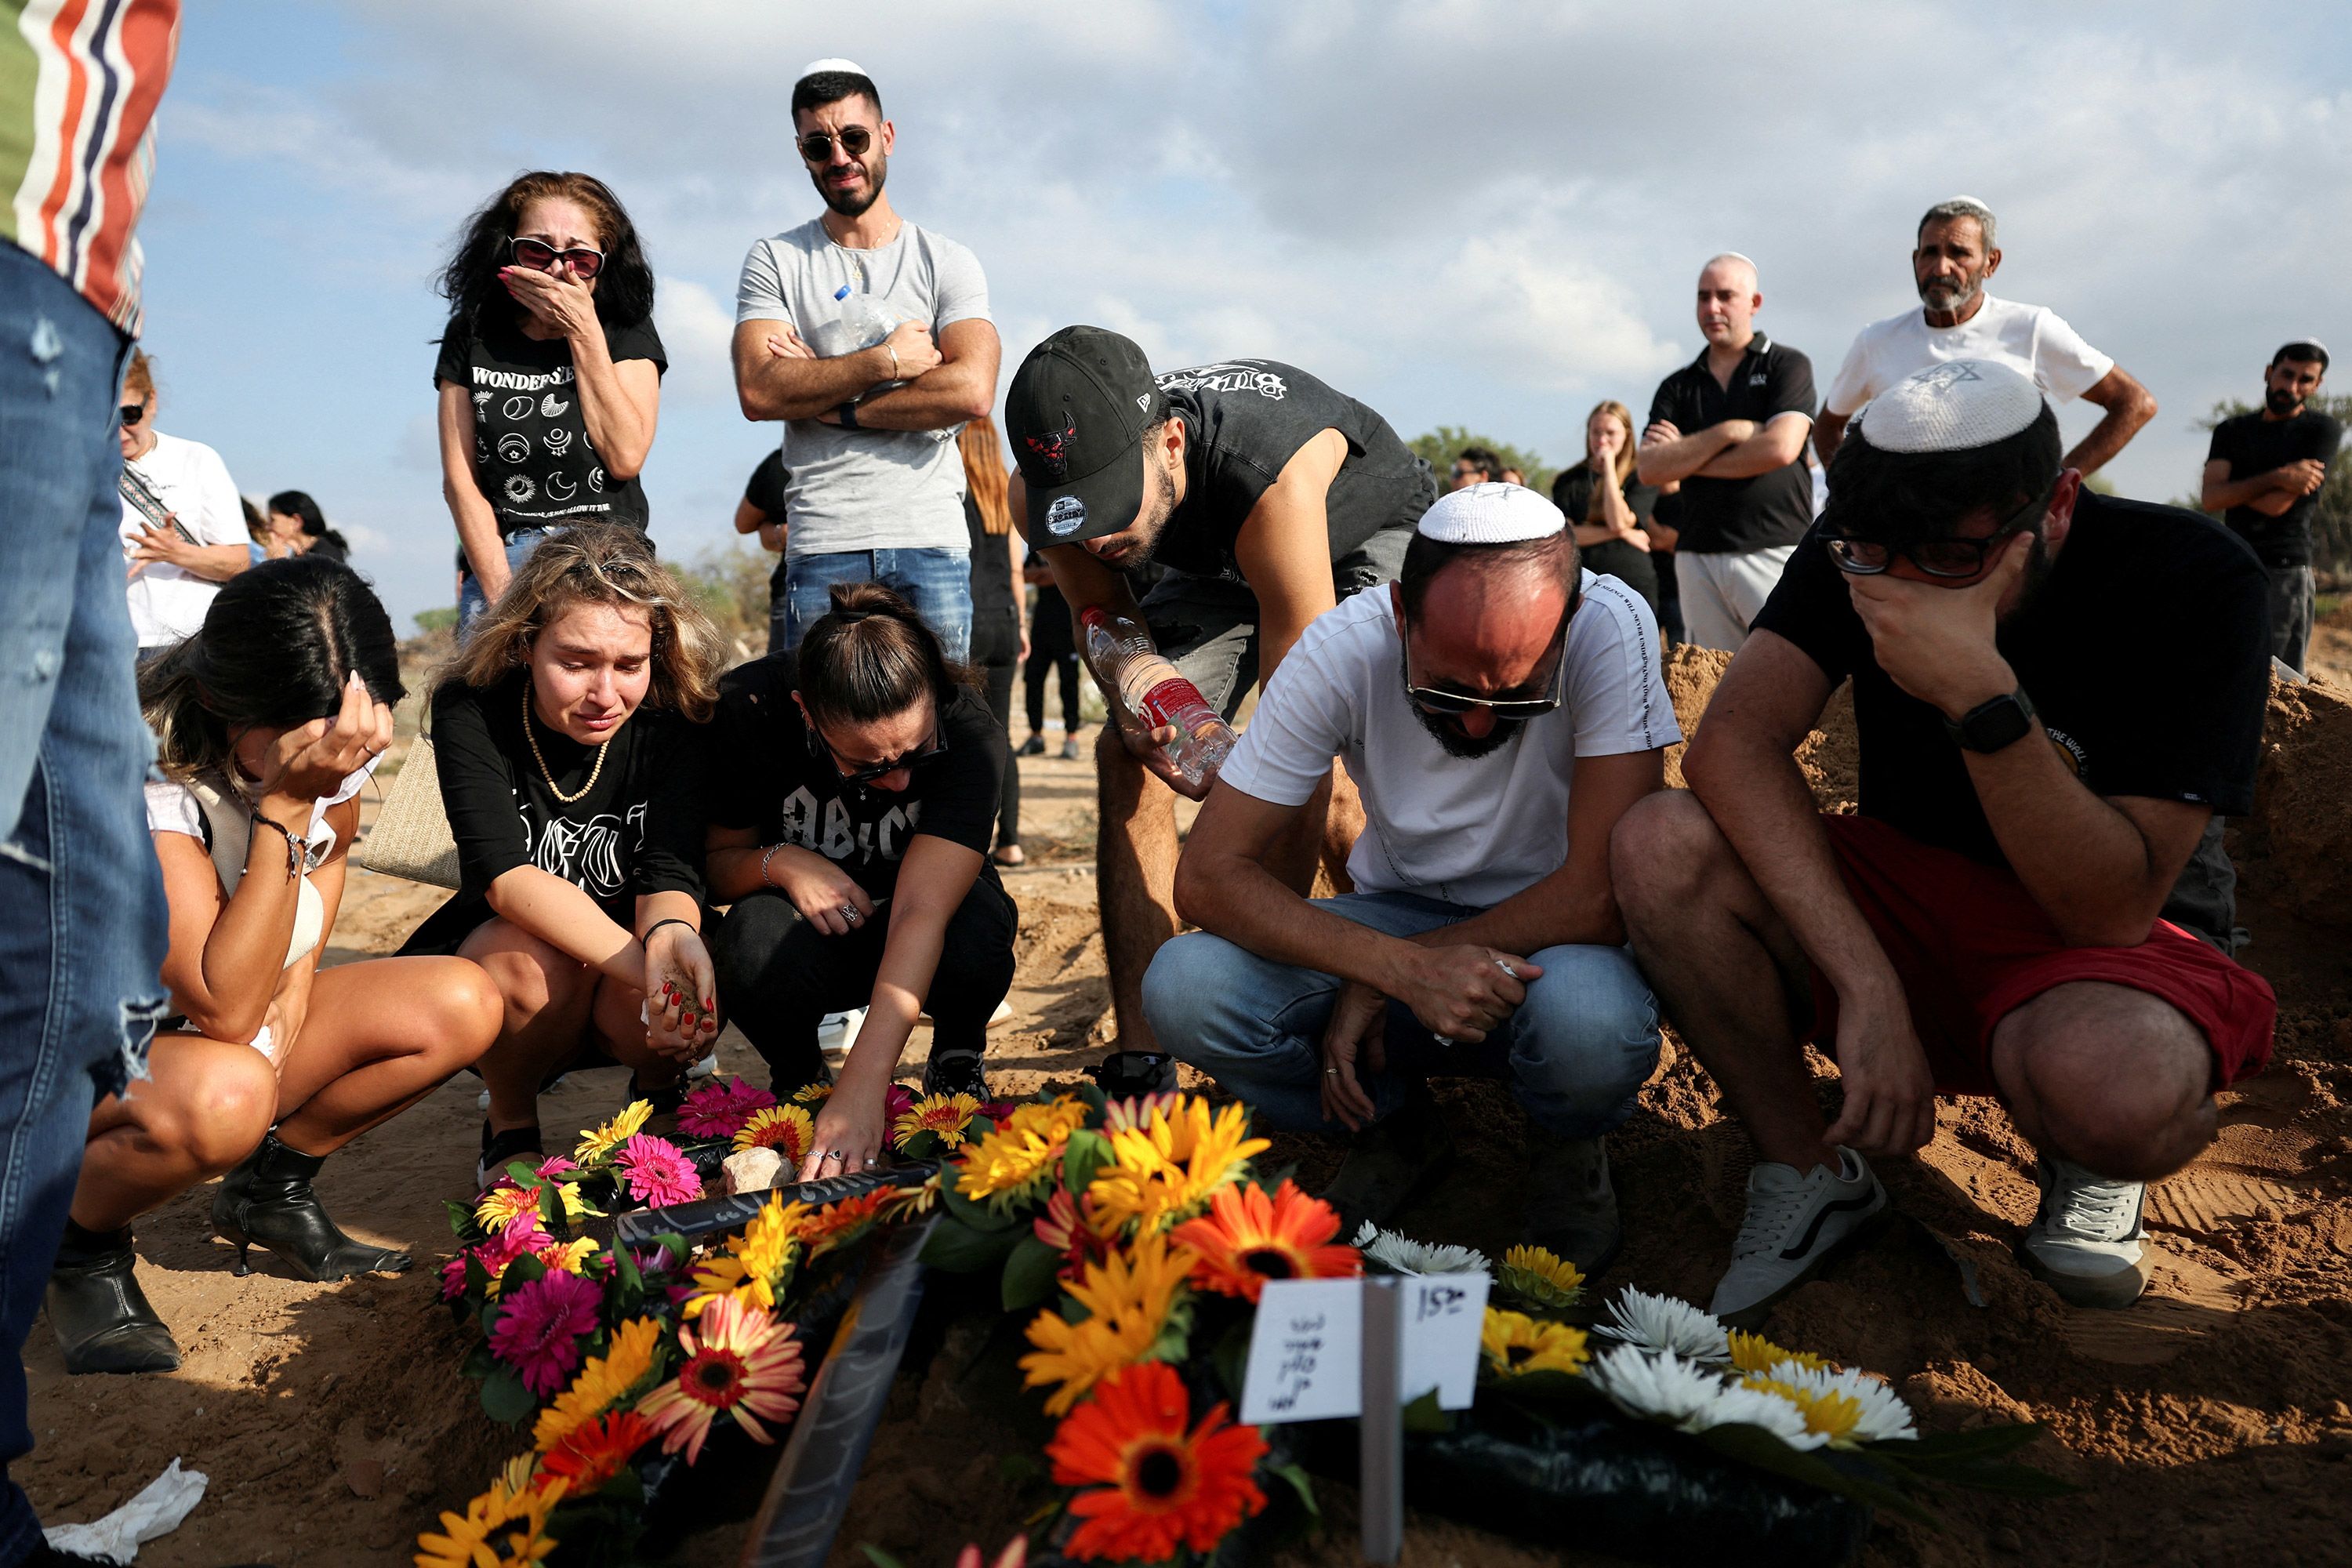 People mourn at the grave of Eden Guez during her funeral in Ashkelon, Israel, on October 10. She was killed as she attended a music festival that was <a href='https://www.cnn.com/2023/10/07/middleeast/israel-gaza-fighting-hamas-attack-music-festival-intl-hnk/index.html' target='_blank'>attacked by terrorists from Gaza</a>. Israeli officials counted at least 260 bodies at the Nova Festival.